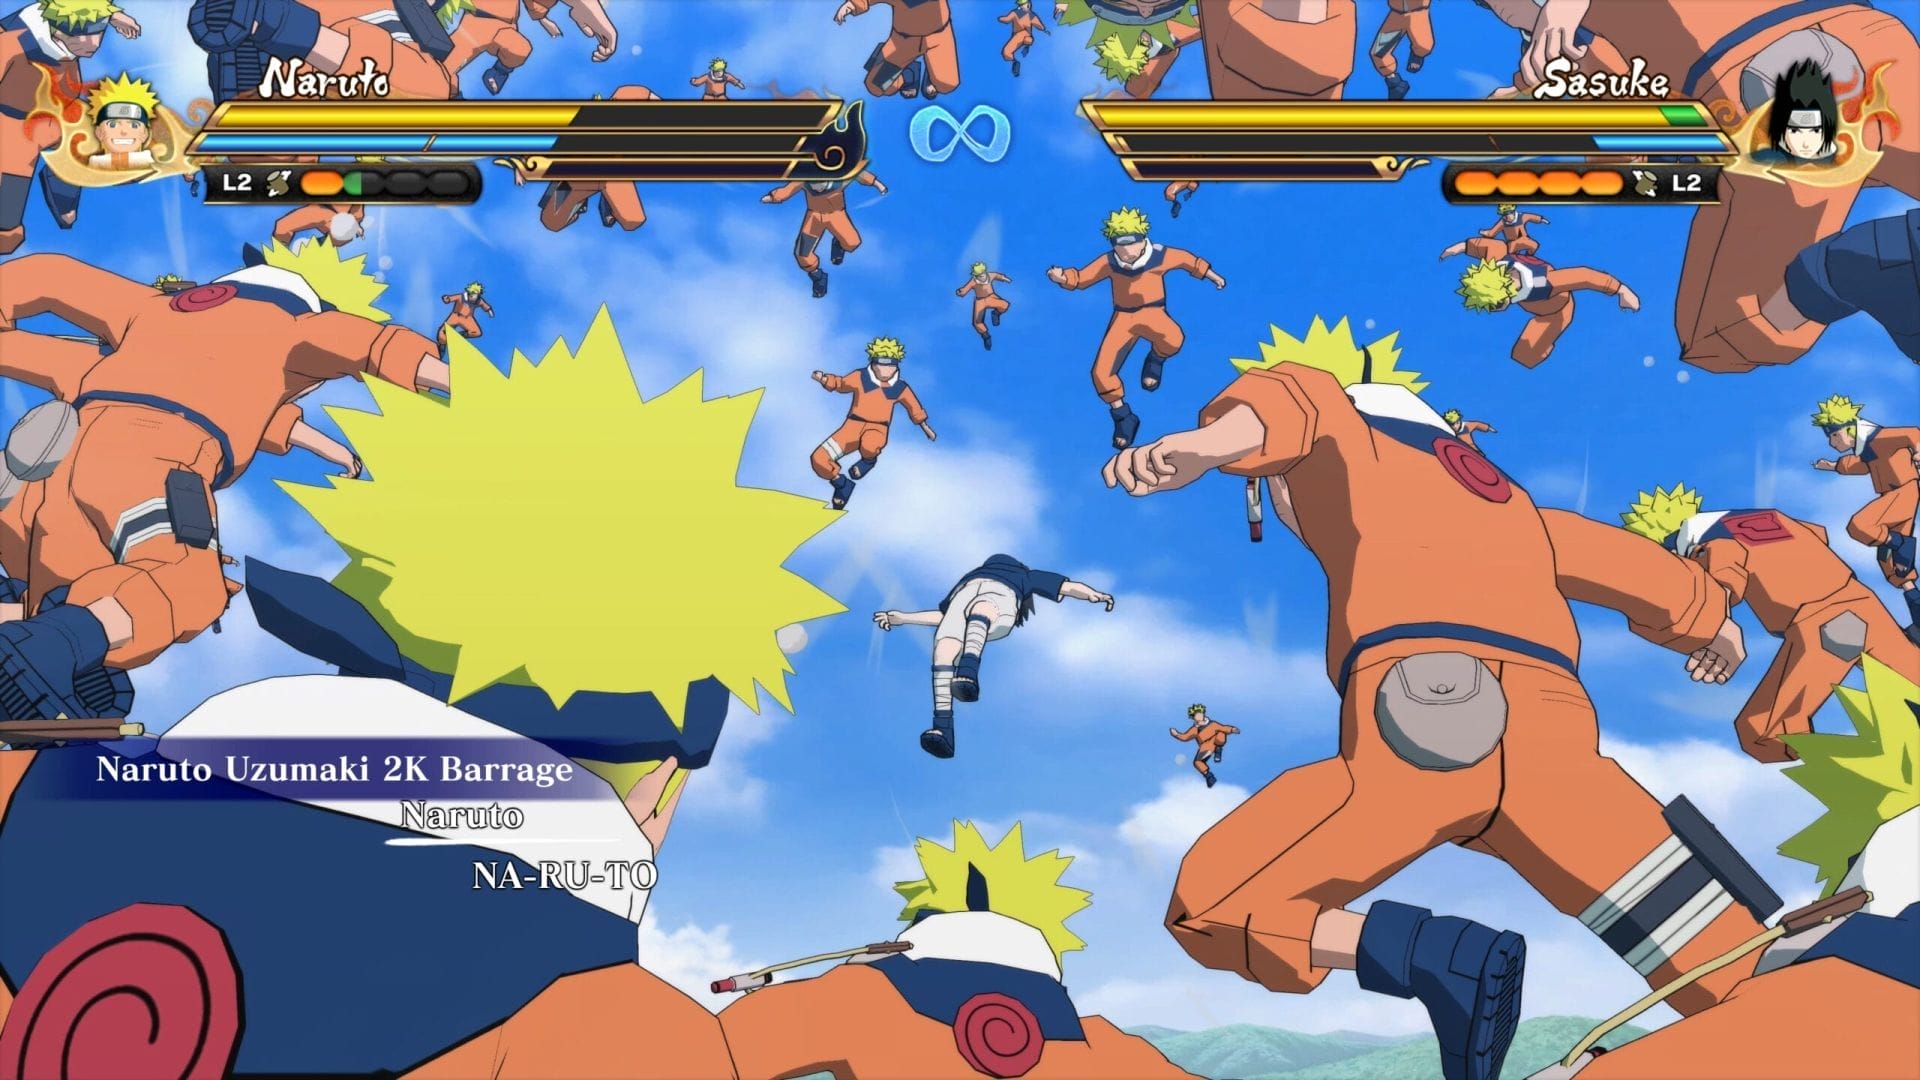 Screenshot from Naruto x Boruto: Ultimate Ninja Storm Connections that depicts a swarm of Narutos descending on their opponent.